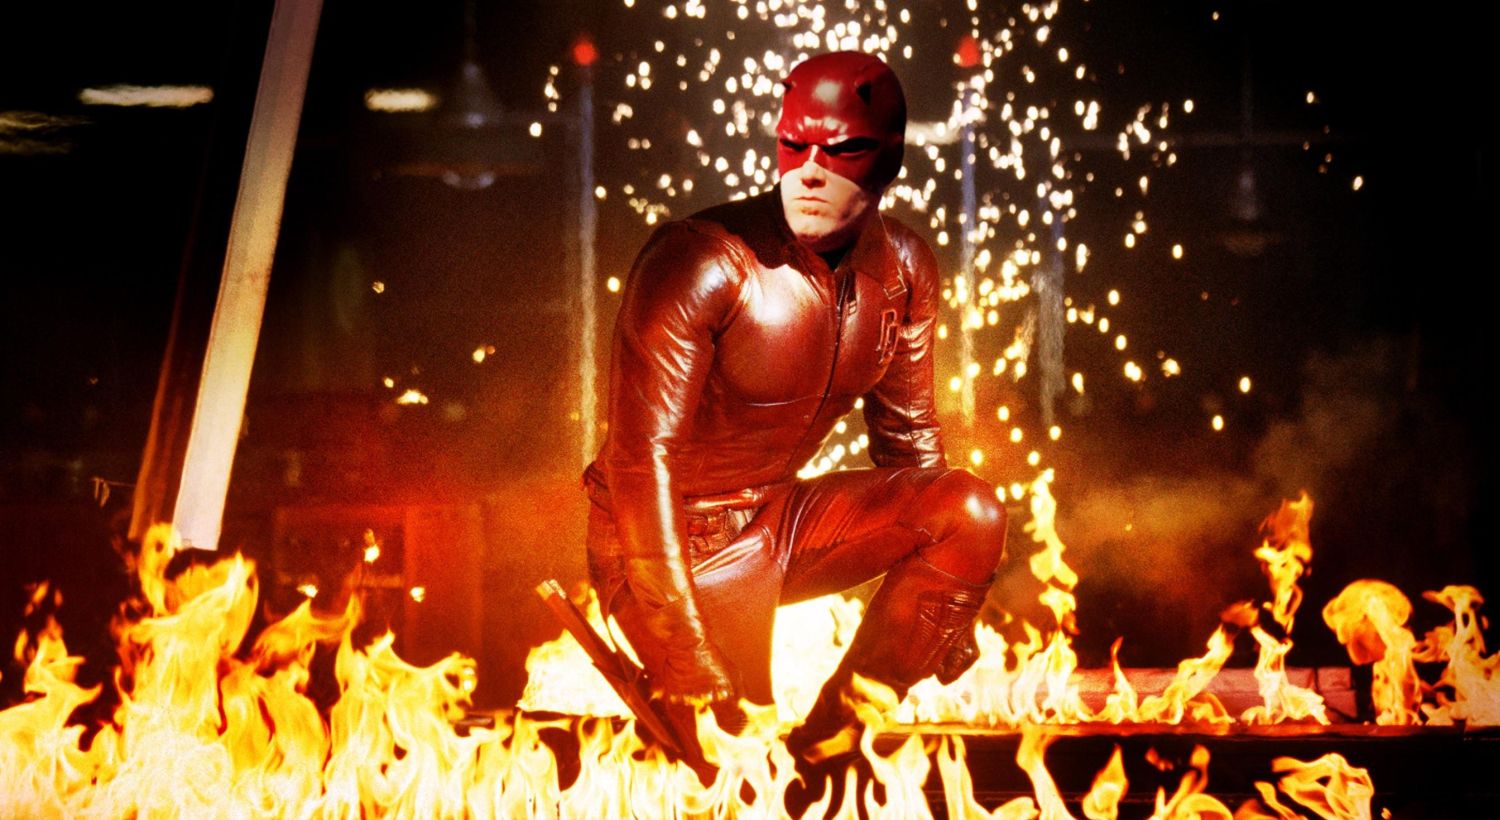 Daredevil (2003) - Theatrical or Director's Cut? This or That Edition